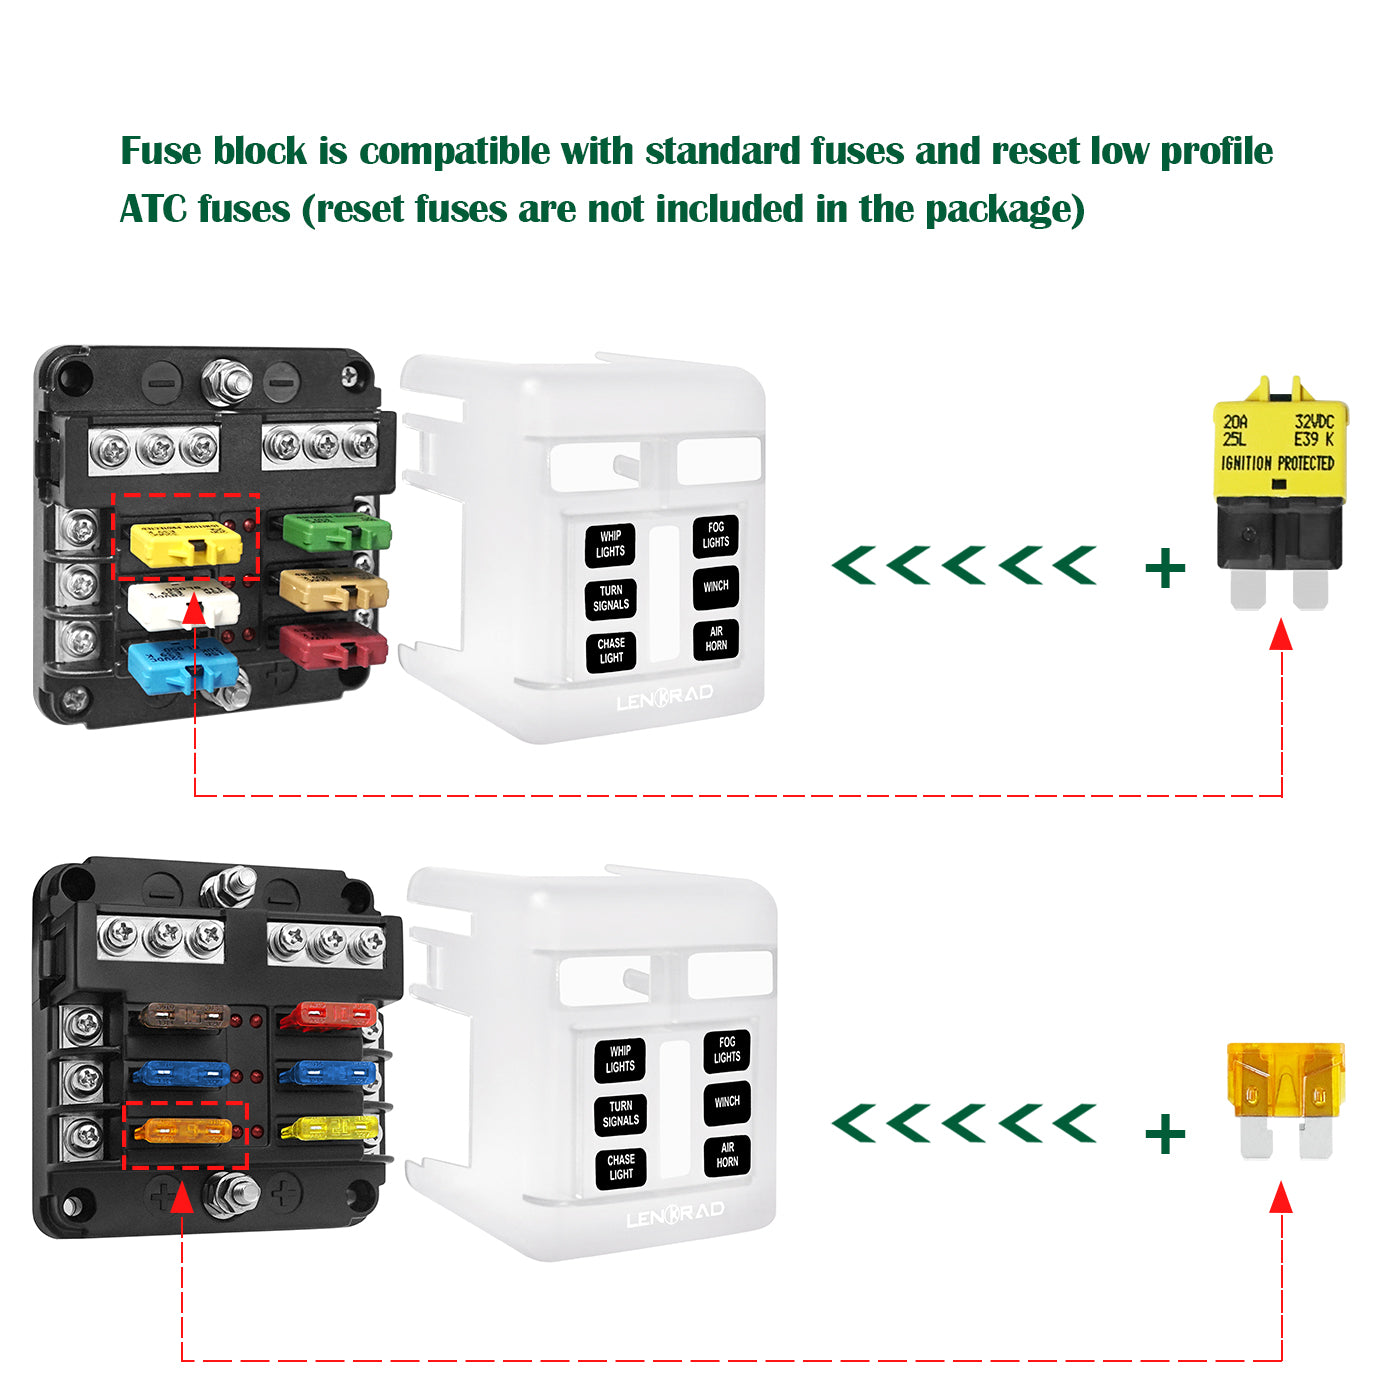 6 Way Blade ATO/ATC Fuse Blocks with Negative Bus Fuse Box, Protection Cover, Bolt Connect Terminals, Labels Sticker for Automotive Car Marine RV Truck(12 PCS Fuses) - THALASSA